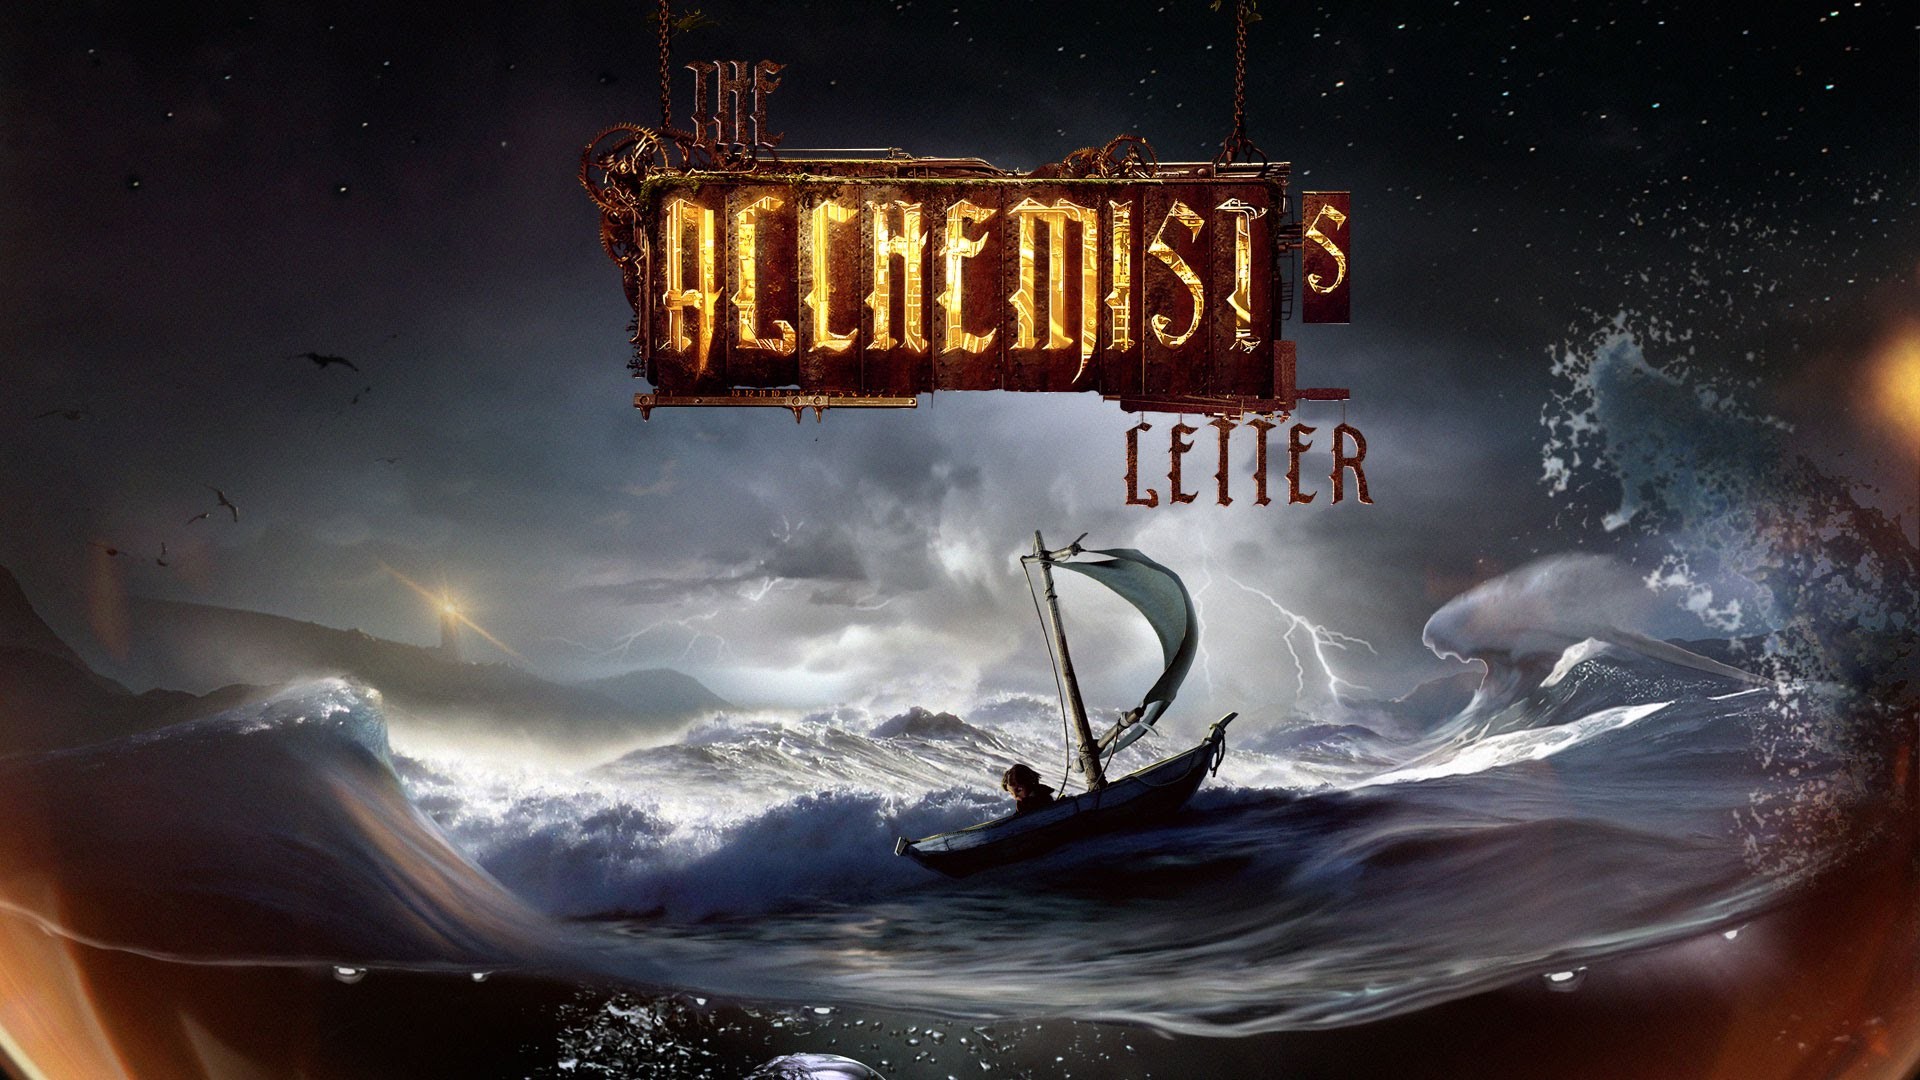 The Alchemists Letter, Sea, Storm, Boat, Water, Clouds, Lighthouse, Lightning, Children Wallpaper